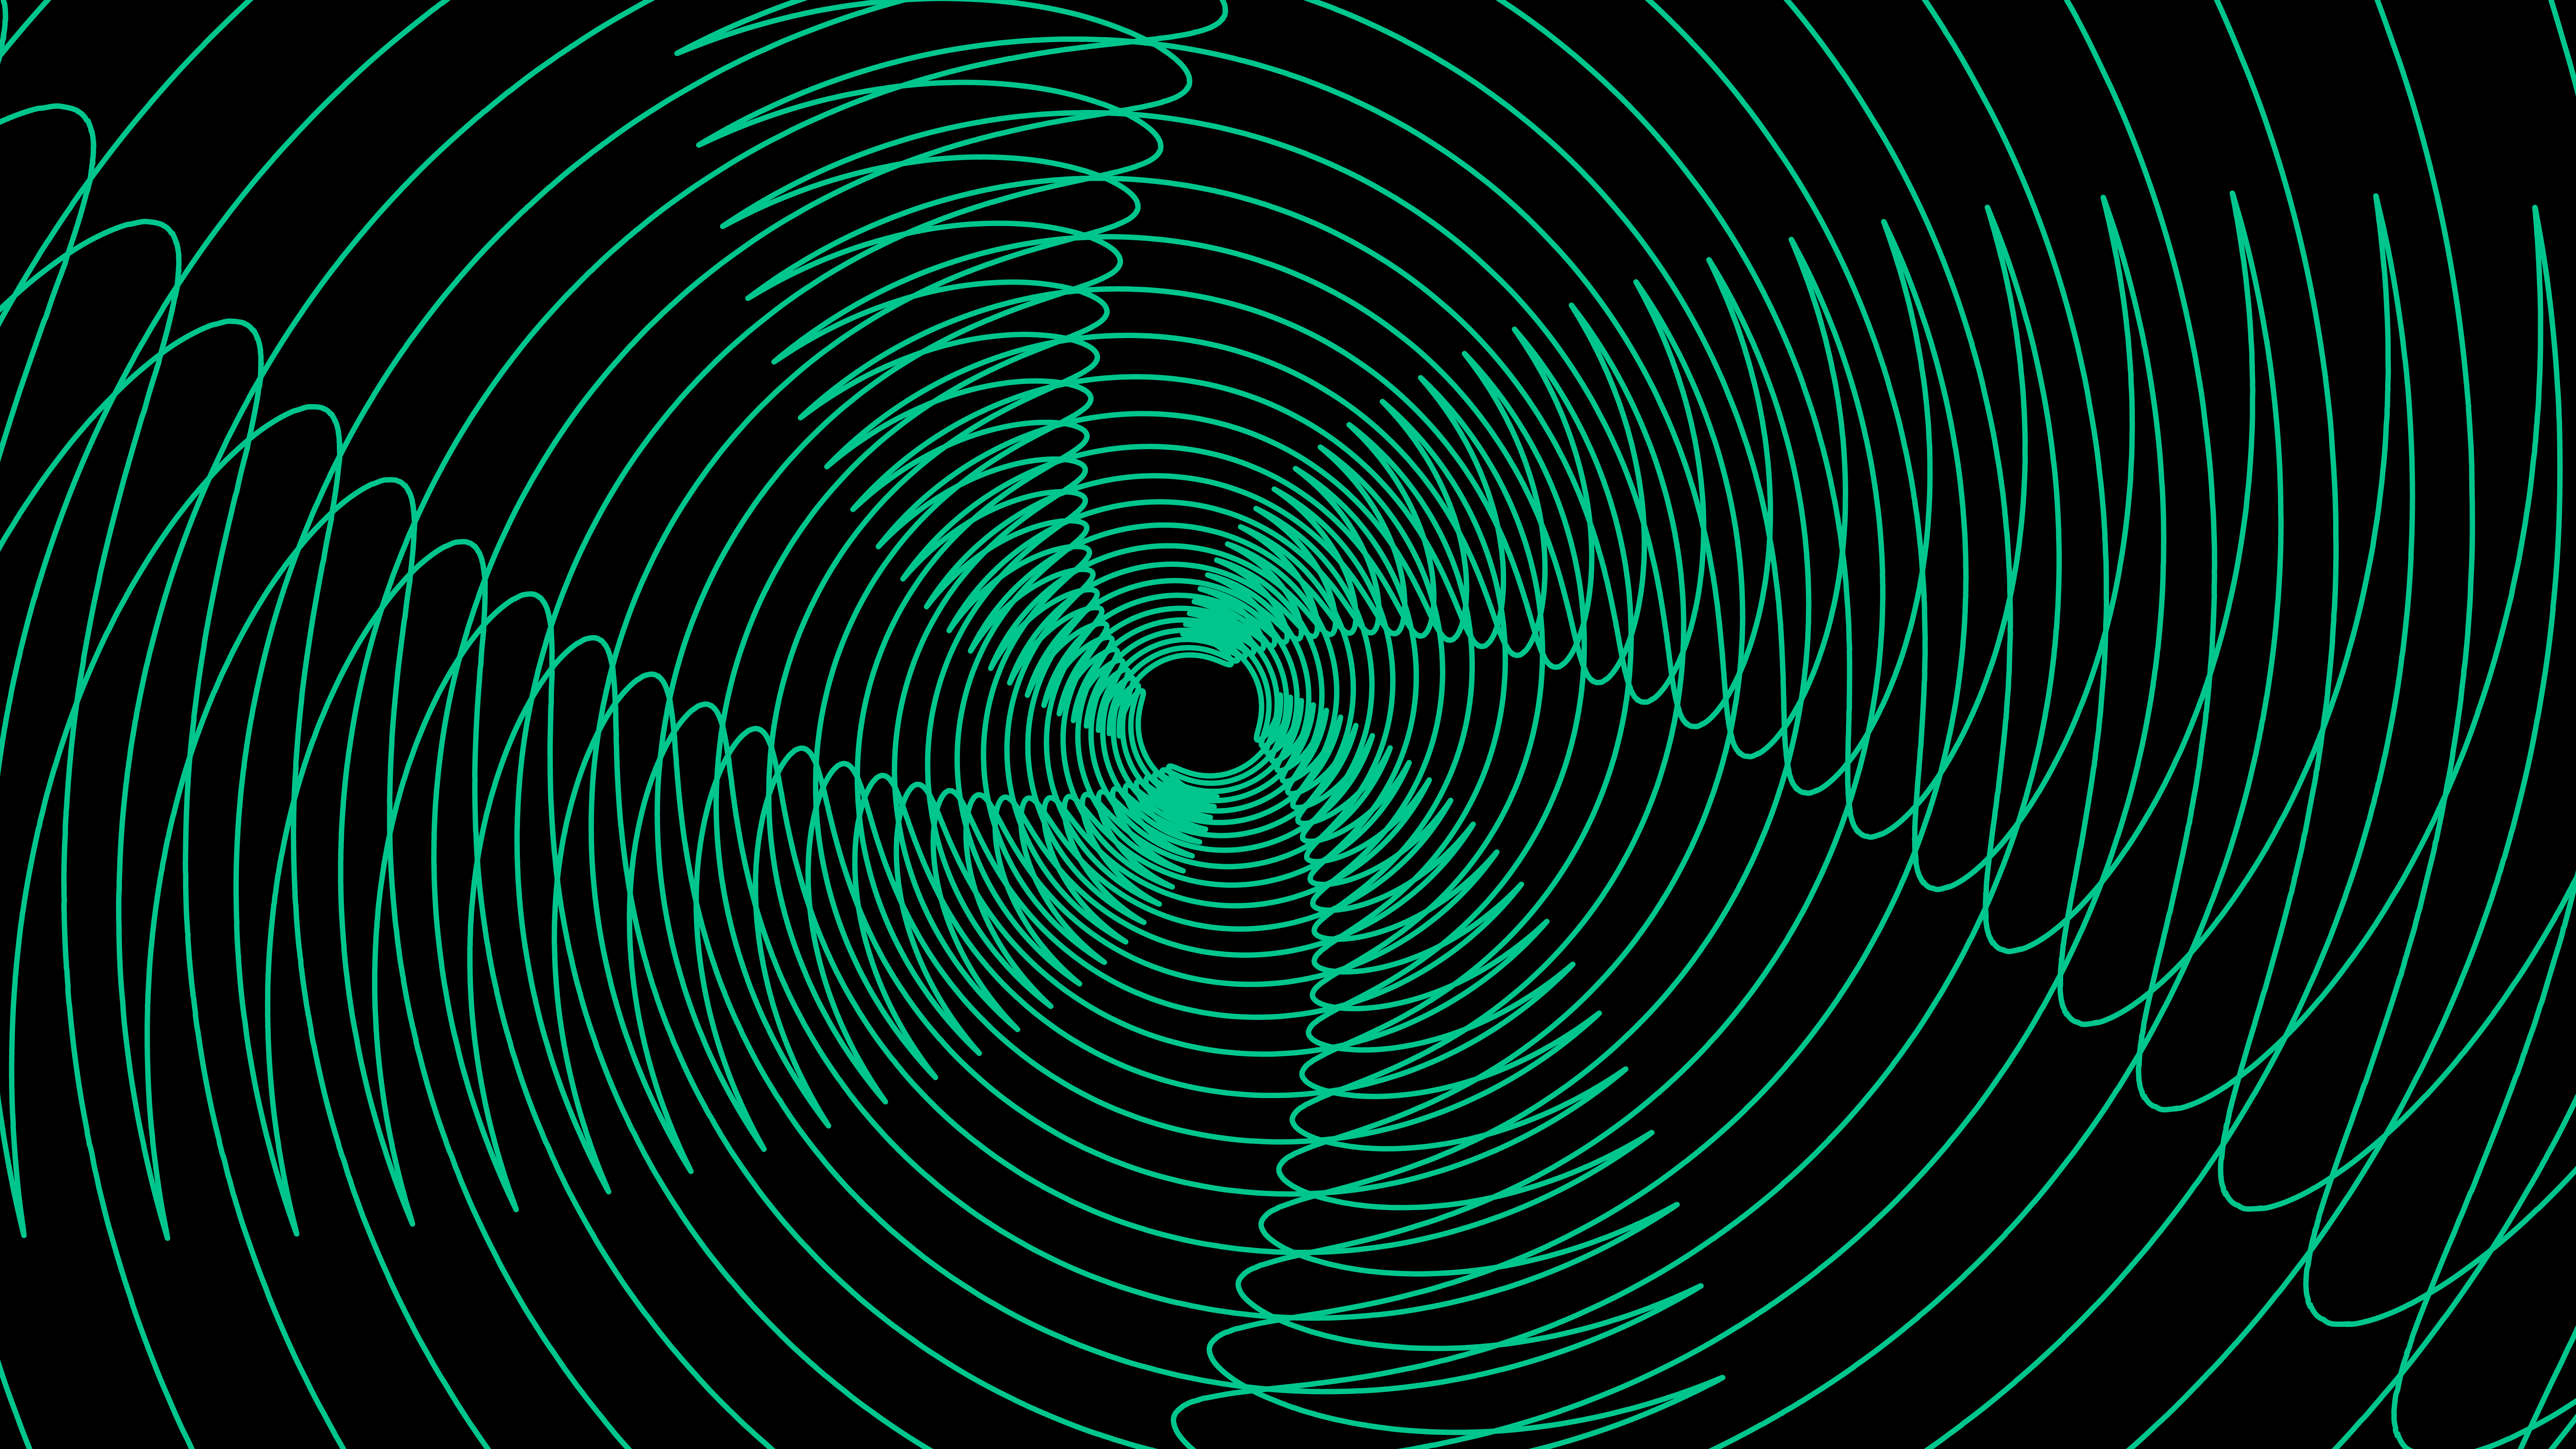 Abstract Digital Art Fractal Lines Spiral Turquoise 7680x4320